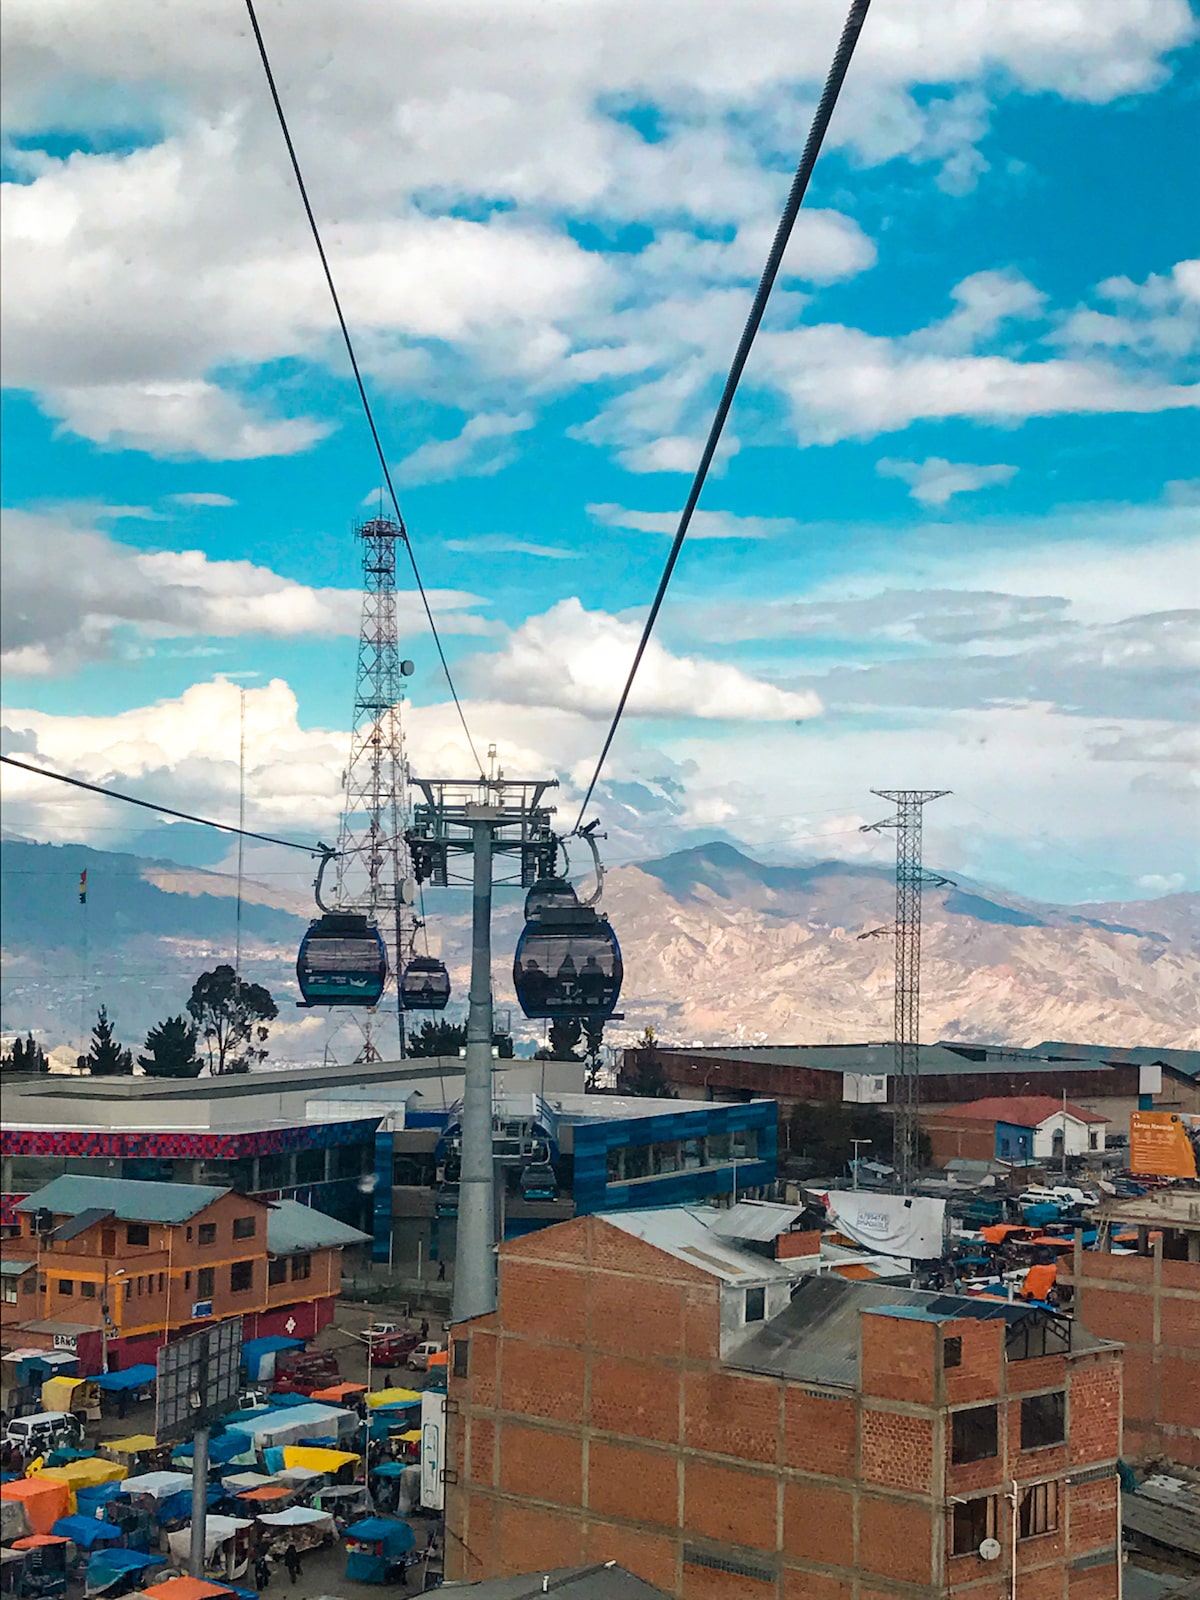 Cable cars high up above the mountains in La Paz, Bolivia.